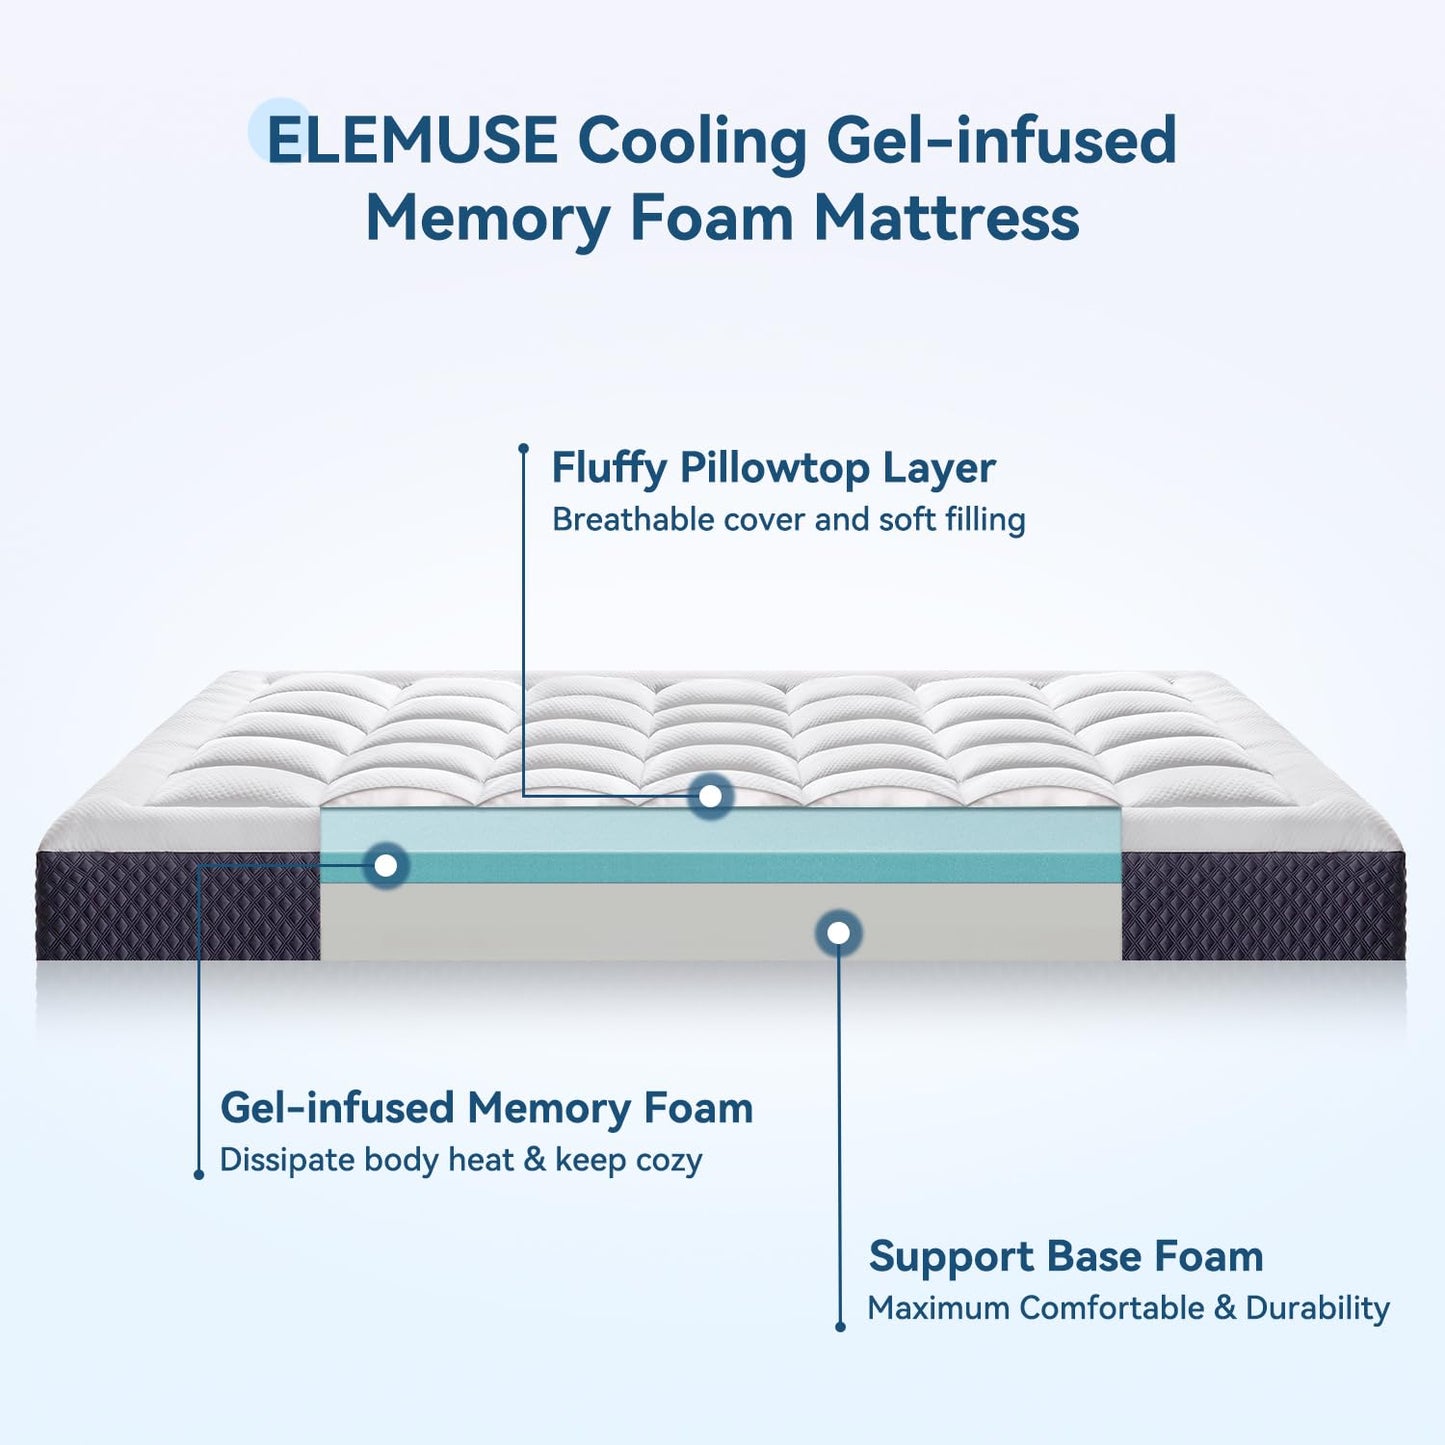 ELEMUSE Twin Mattress 5 Inch Cooling Gel Memory Foam Mattress in a Box for Kids, Plus Pillowtop for Pressure Relief, CertiPUR-US® Certified Bed in a Box for Single Bed, Fiberglass-Free